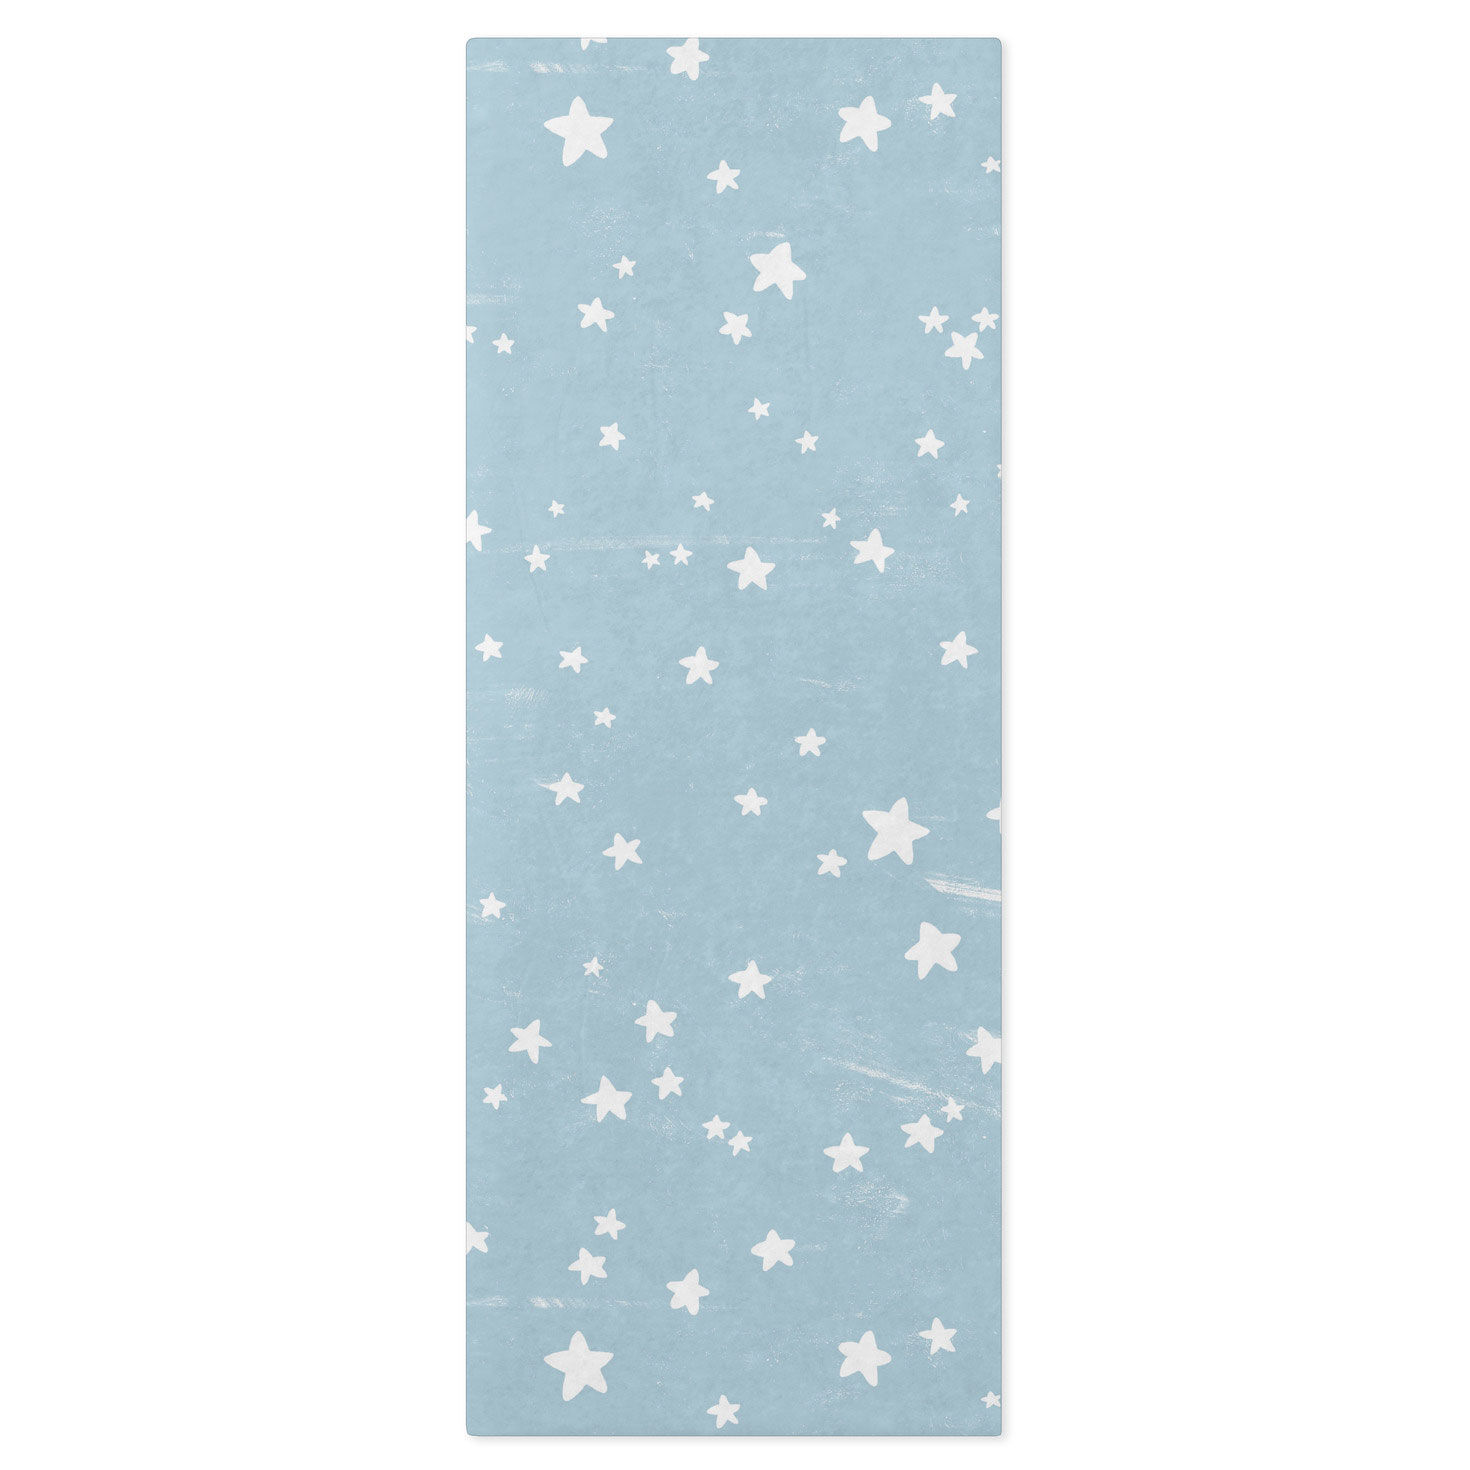 Stars on Pale Blue Tissue Paper, 6 Sheets for only USD 1.99 | Hallmark